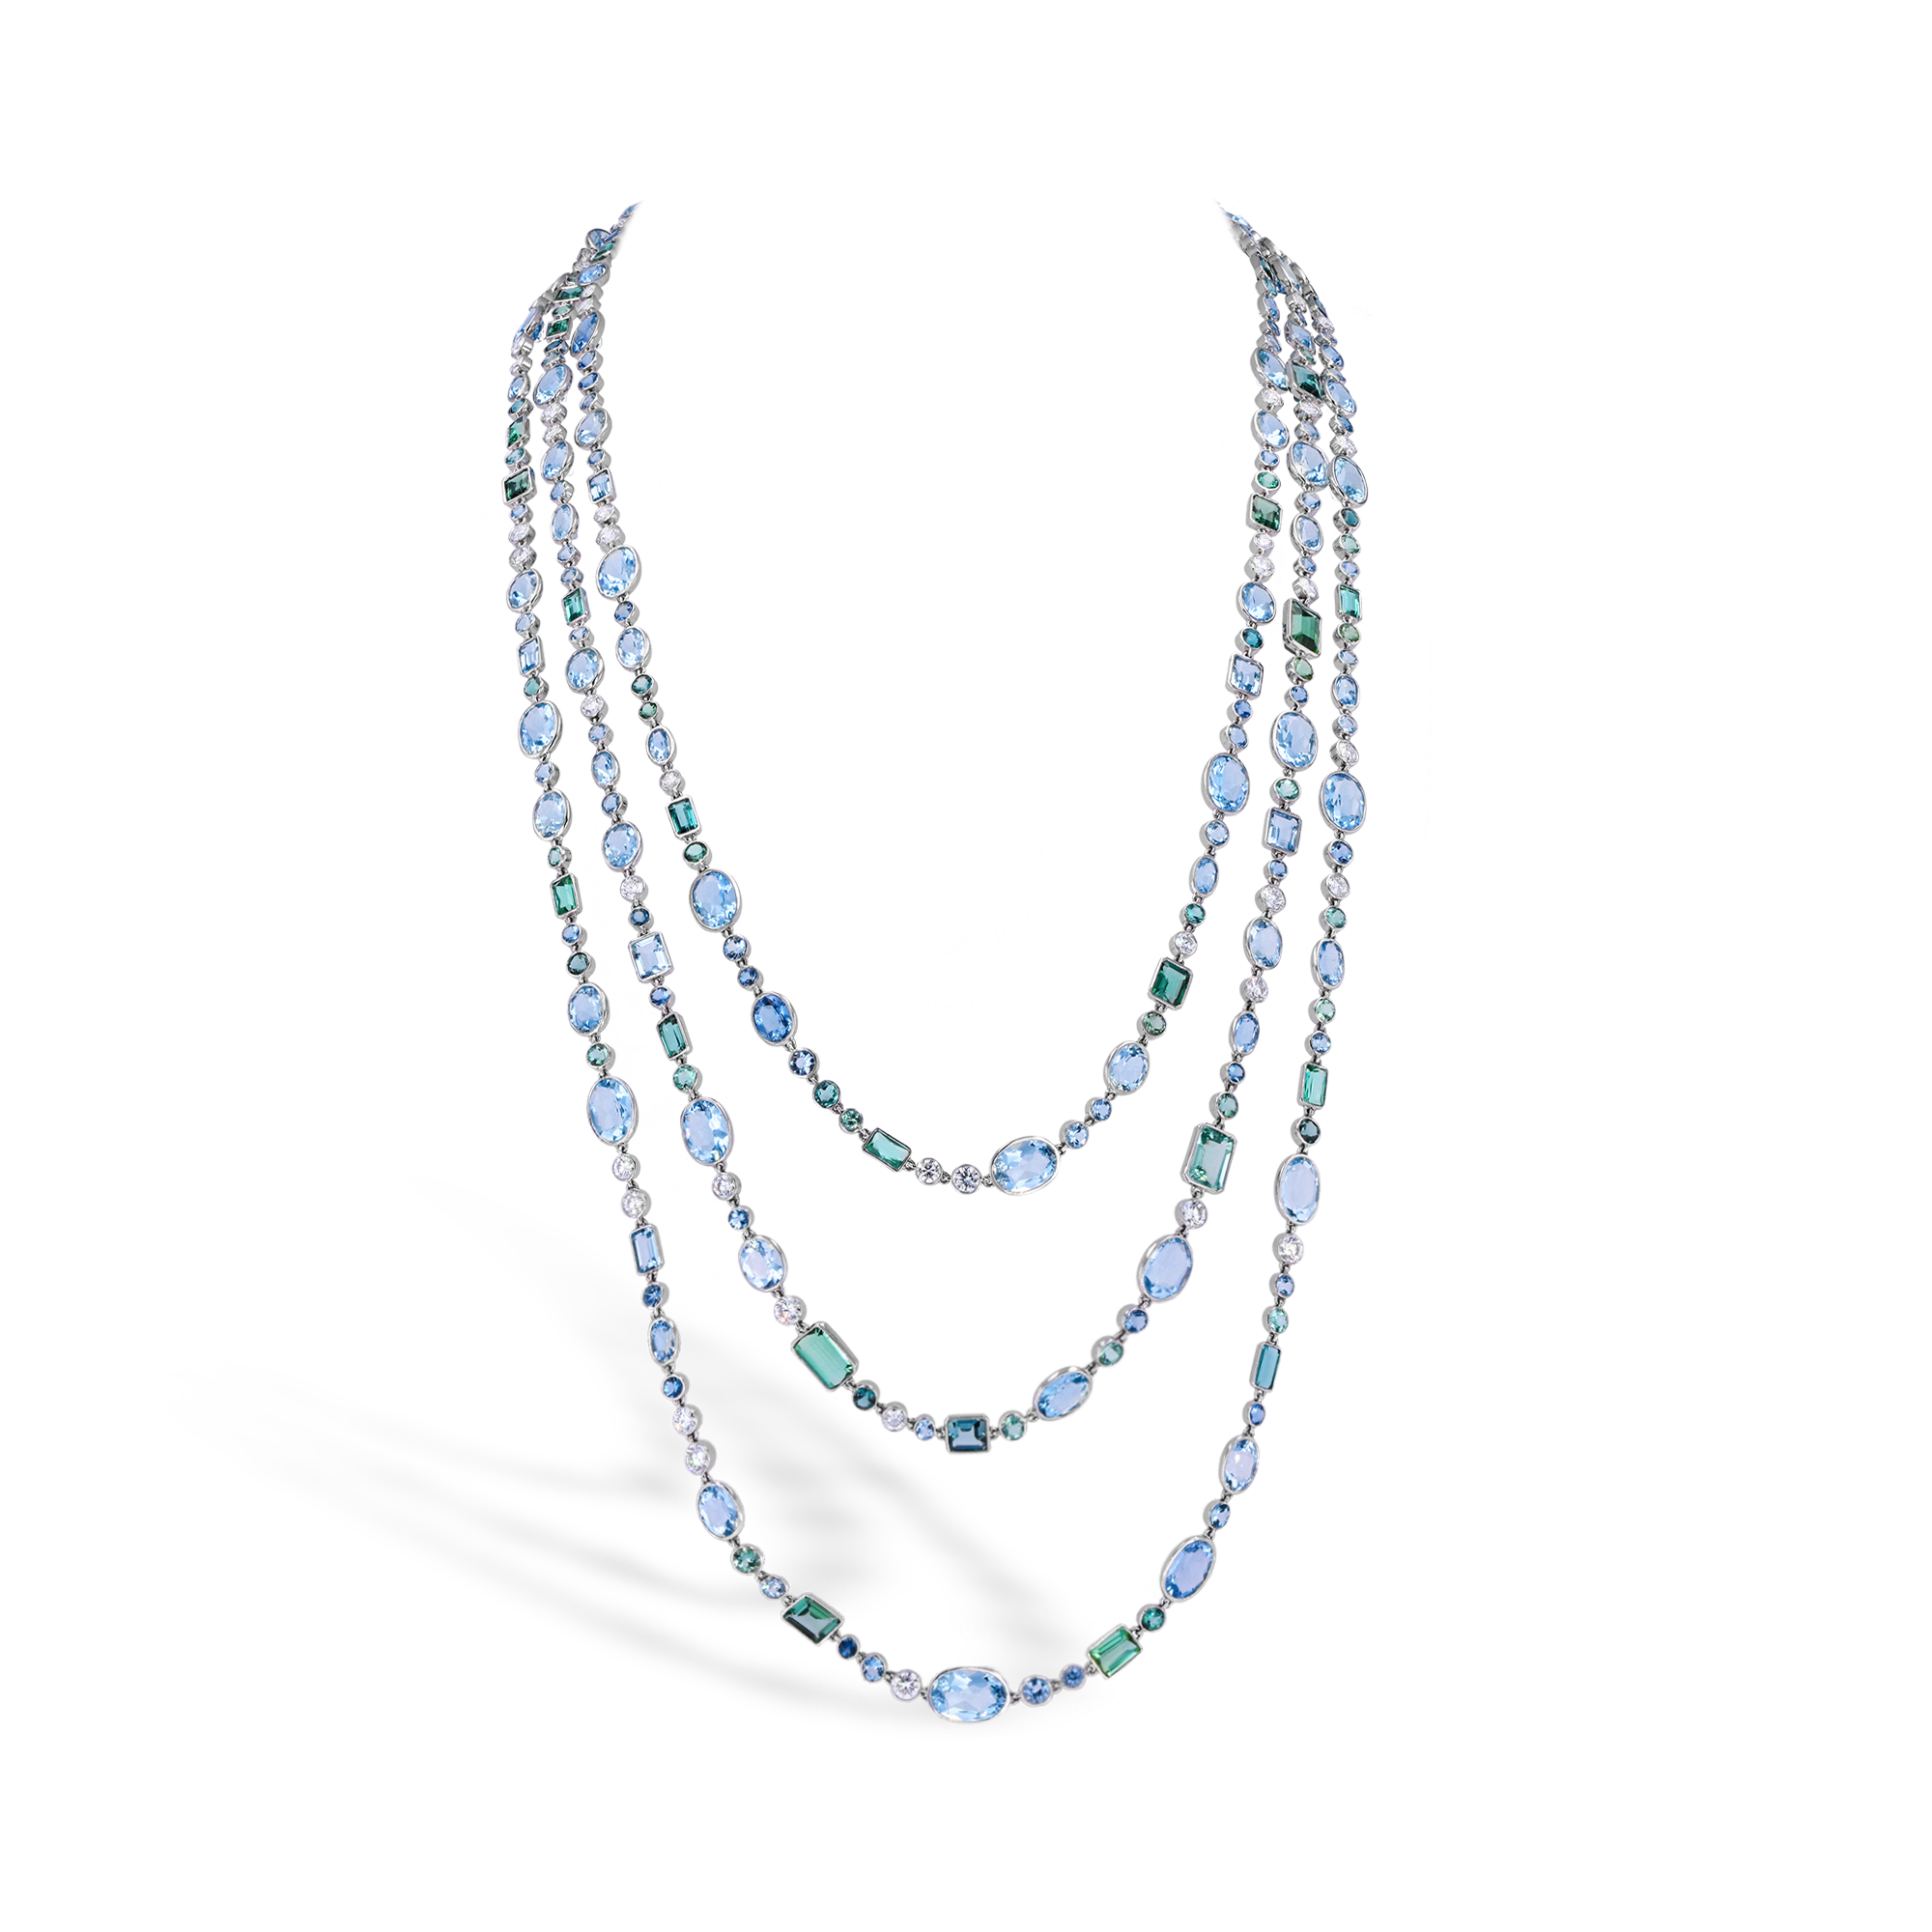 Masterpiece 180cm Aquamarine and Tourmaline Necklace Oval and Emerald Cut, Spectacle Set_1